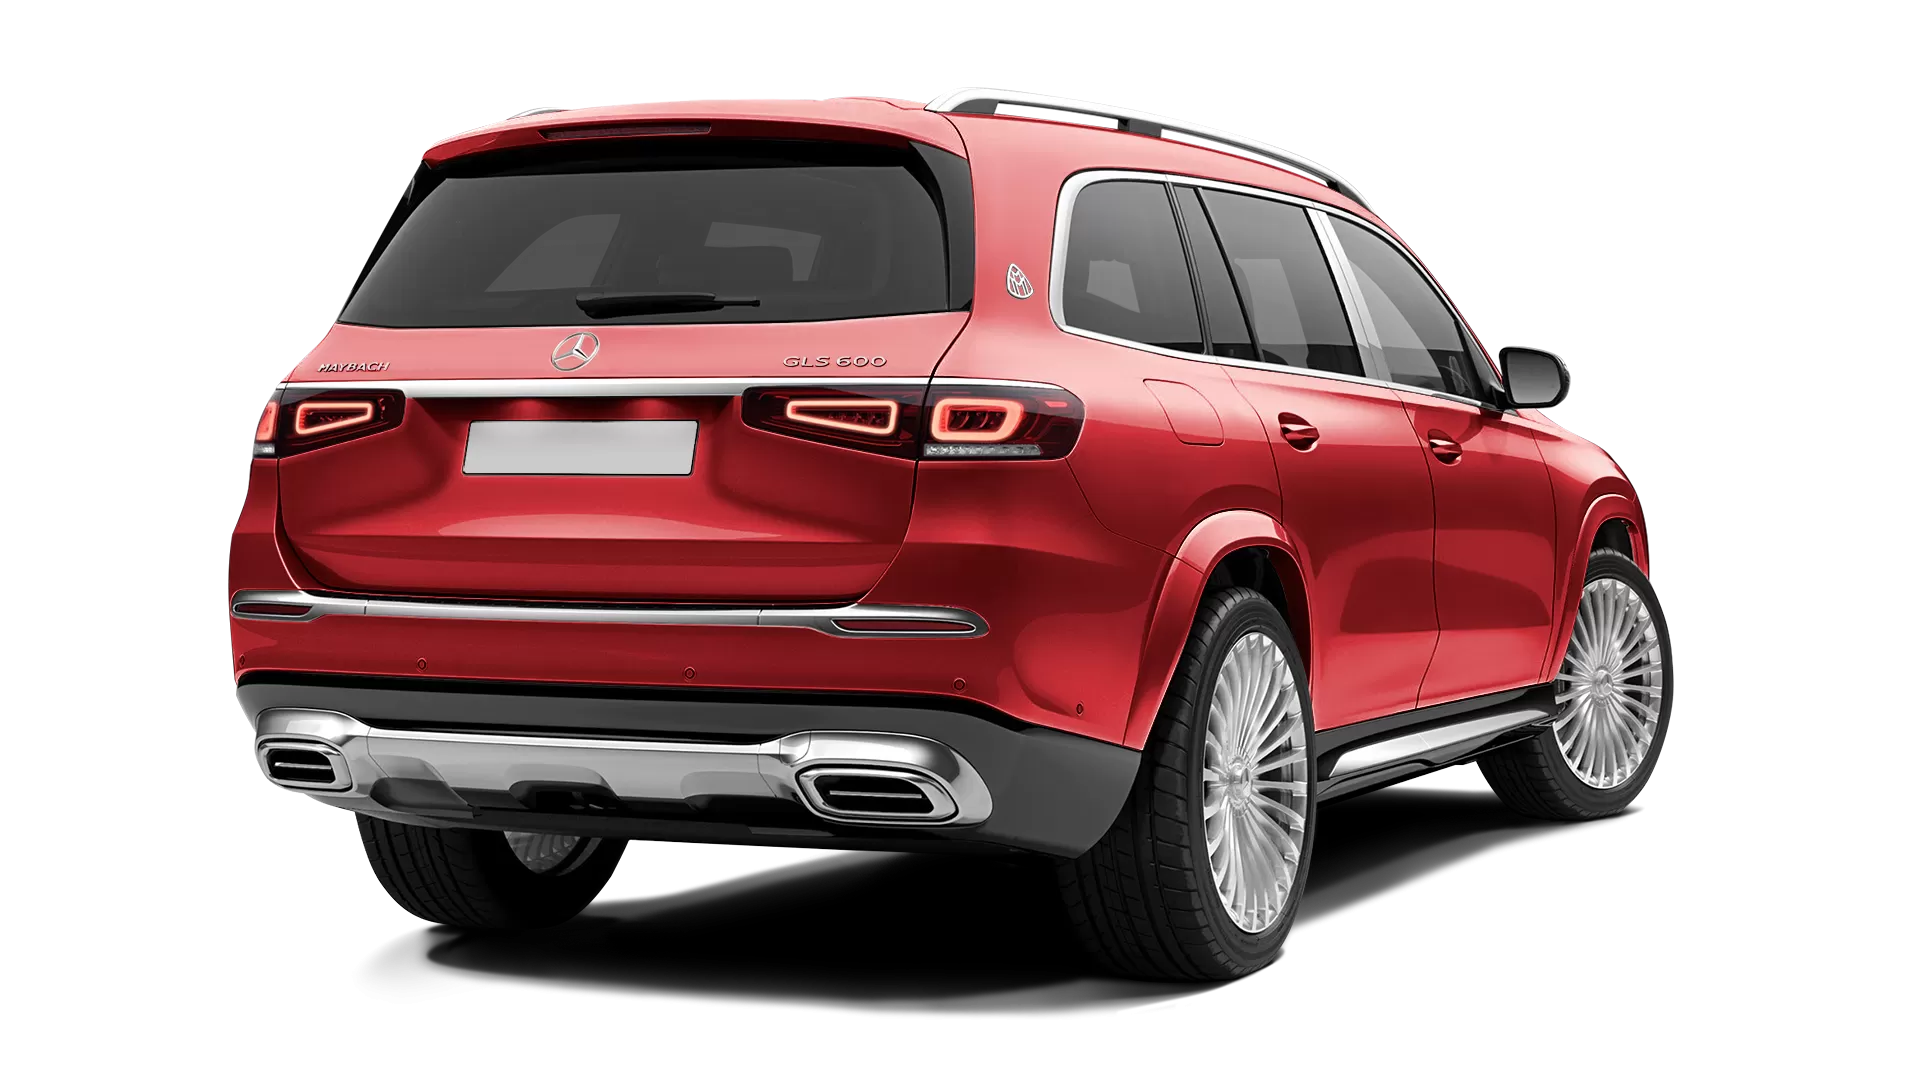 Mercedes Maybach GLS 600 stock rear view in Hyacinthe Red color